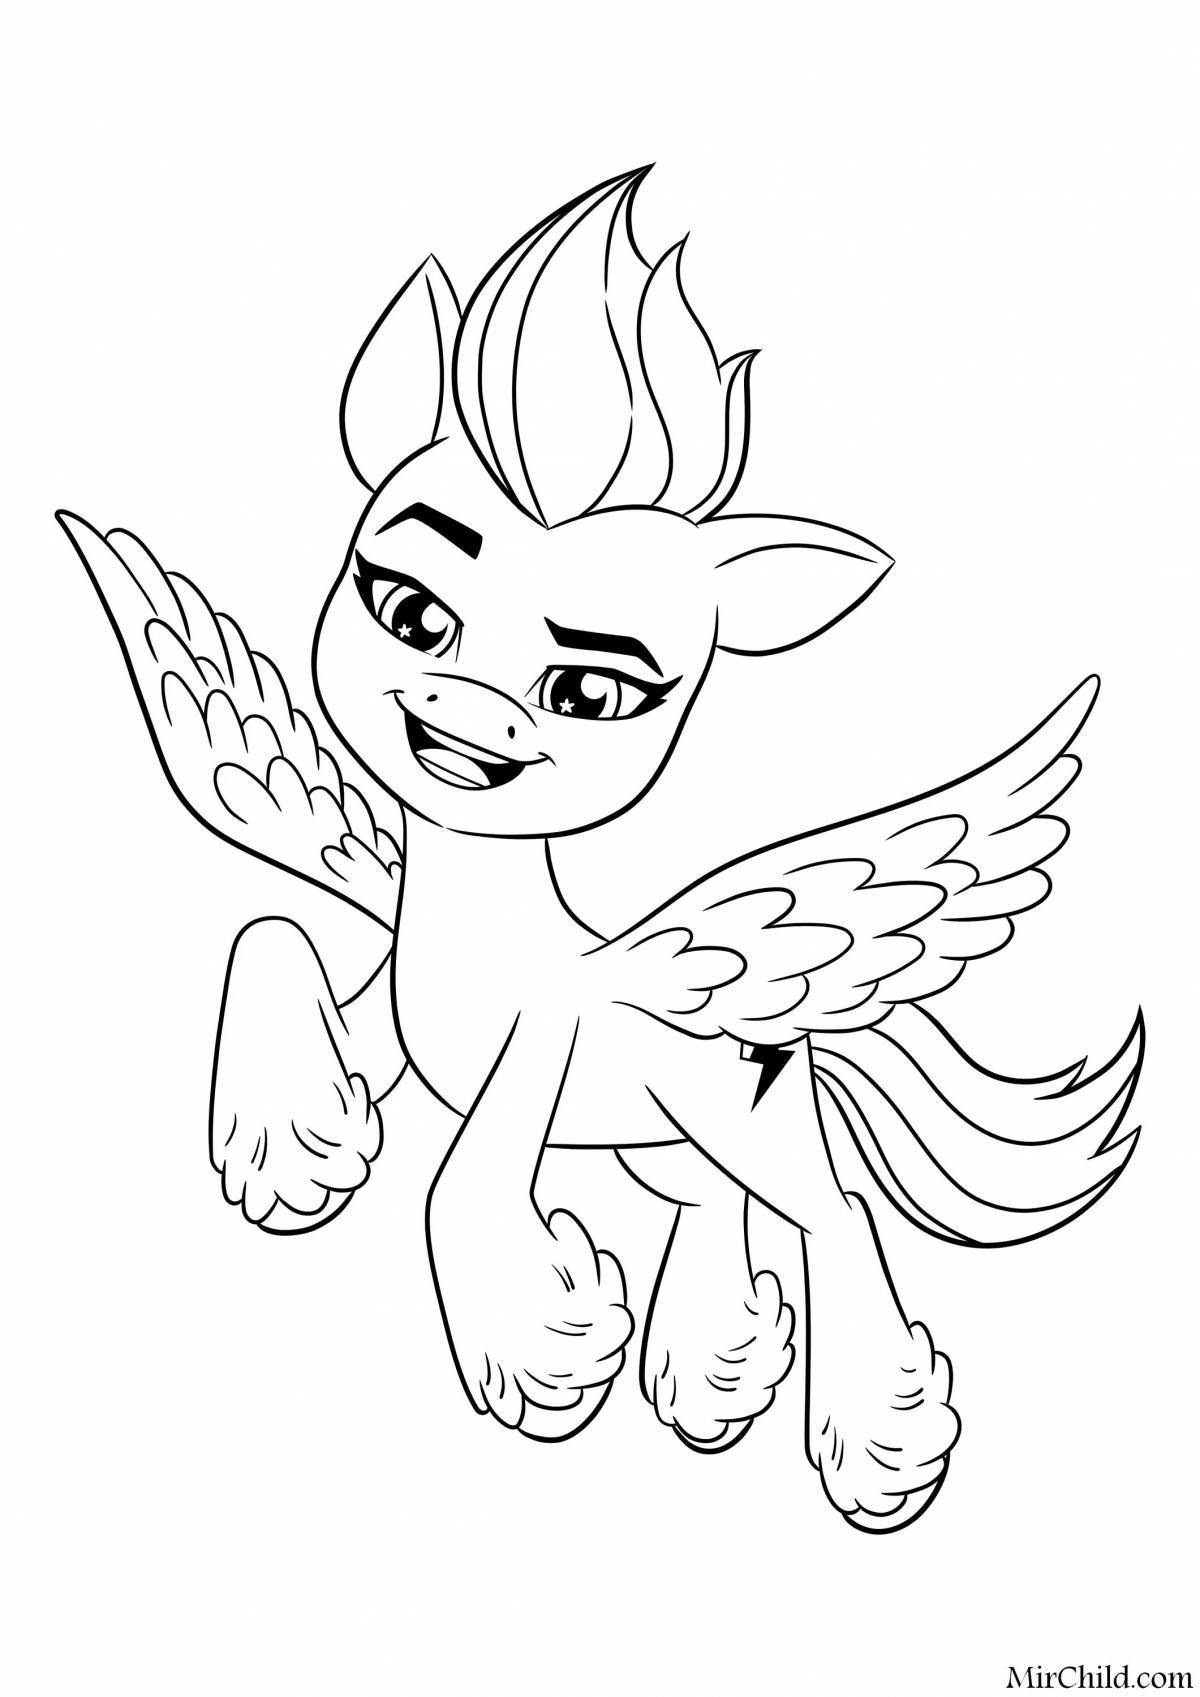 Charming coloring easy pony